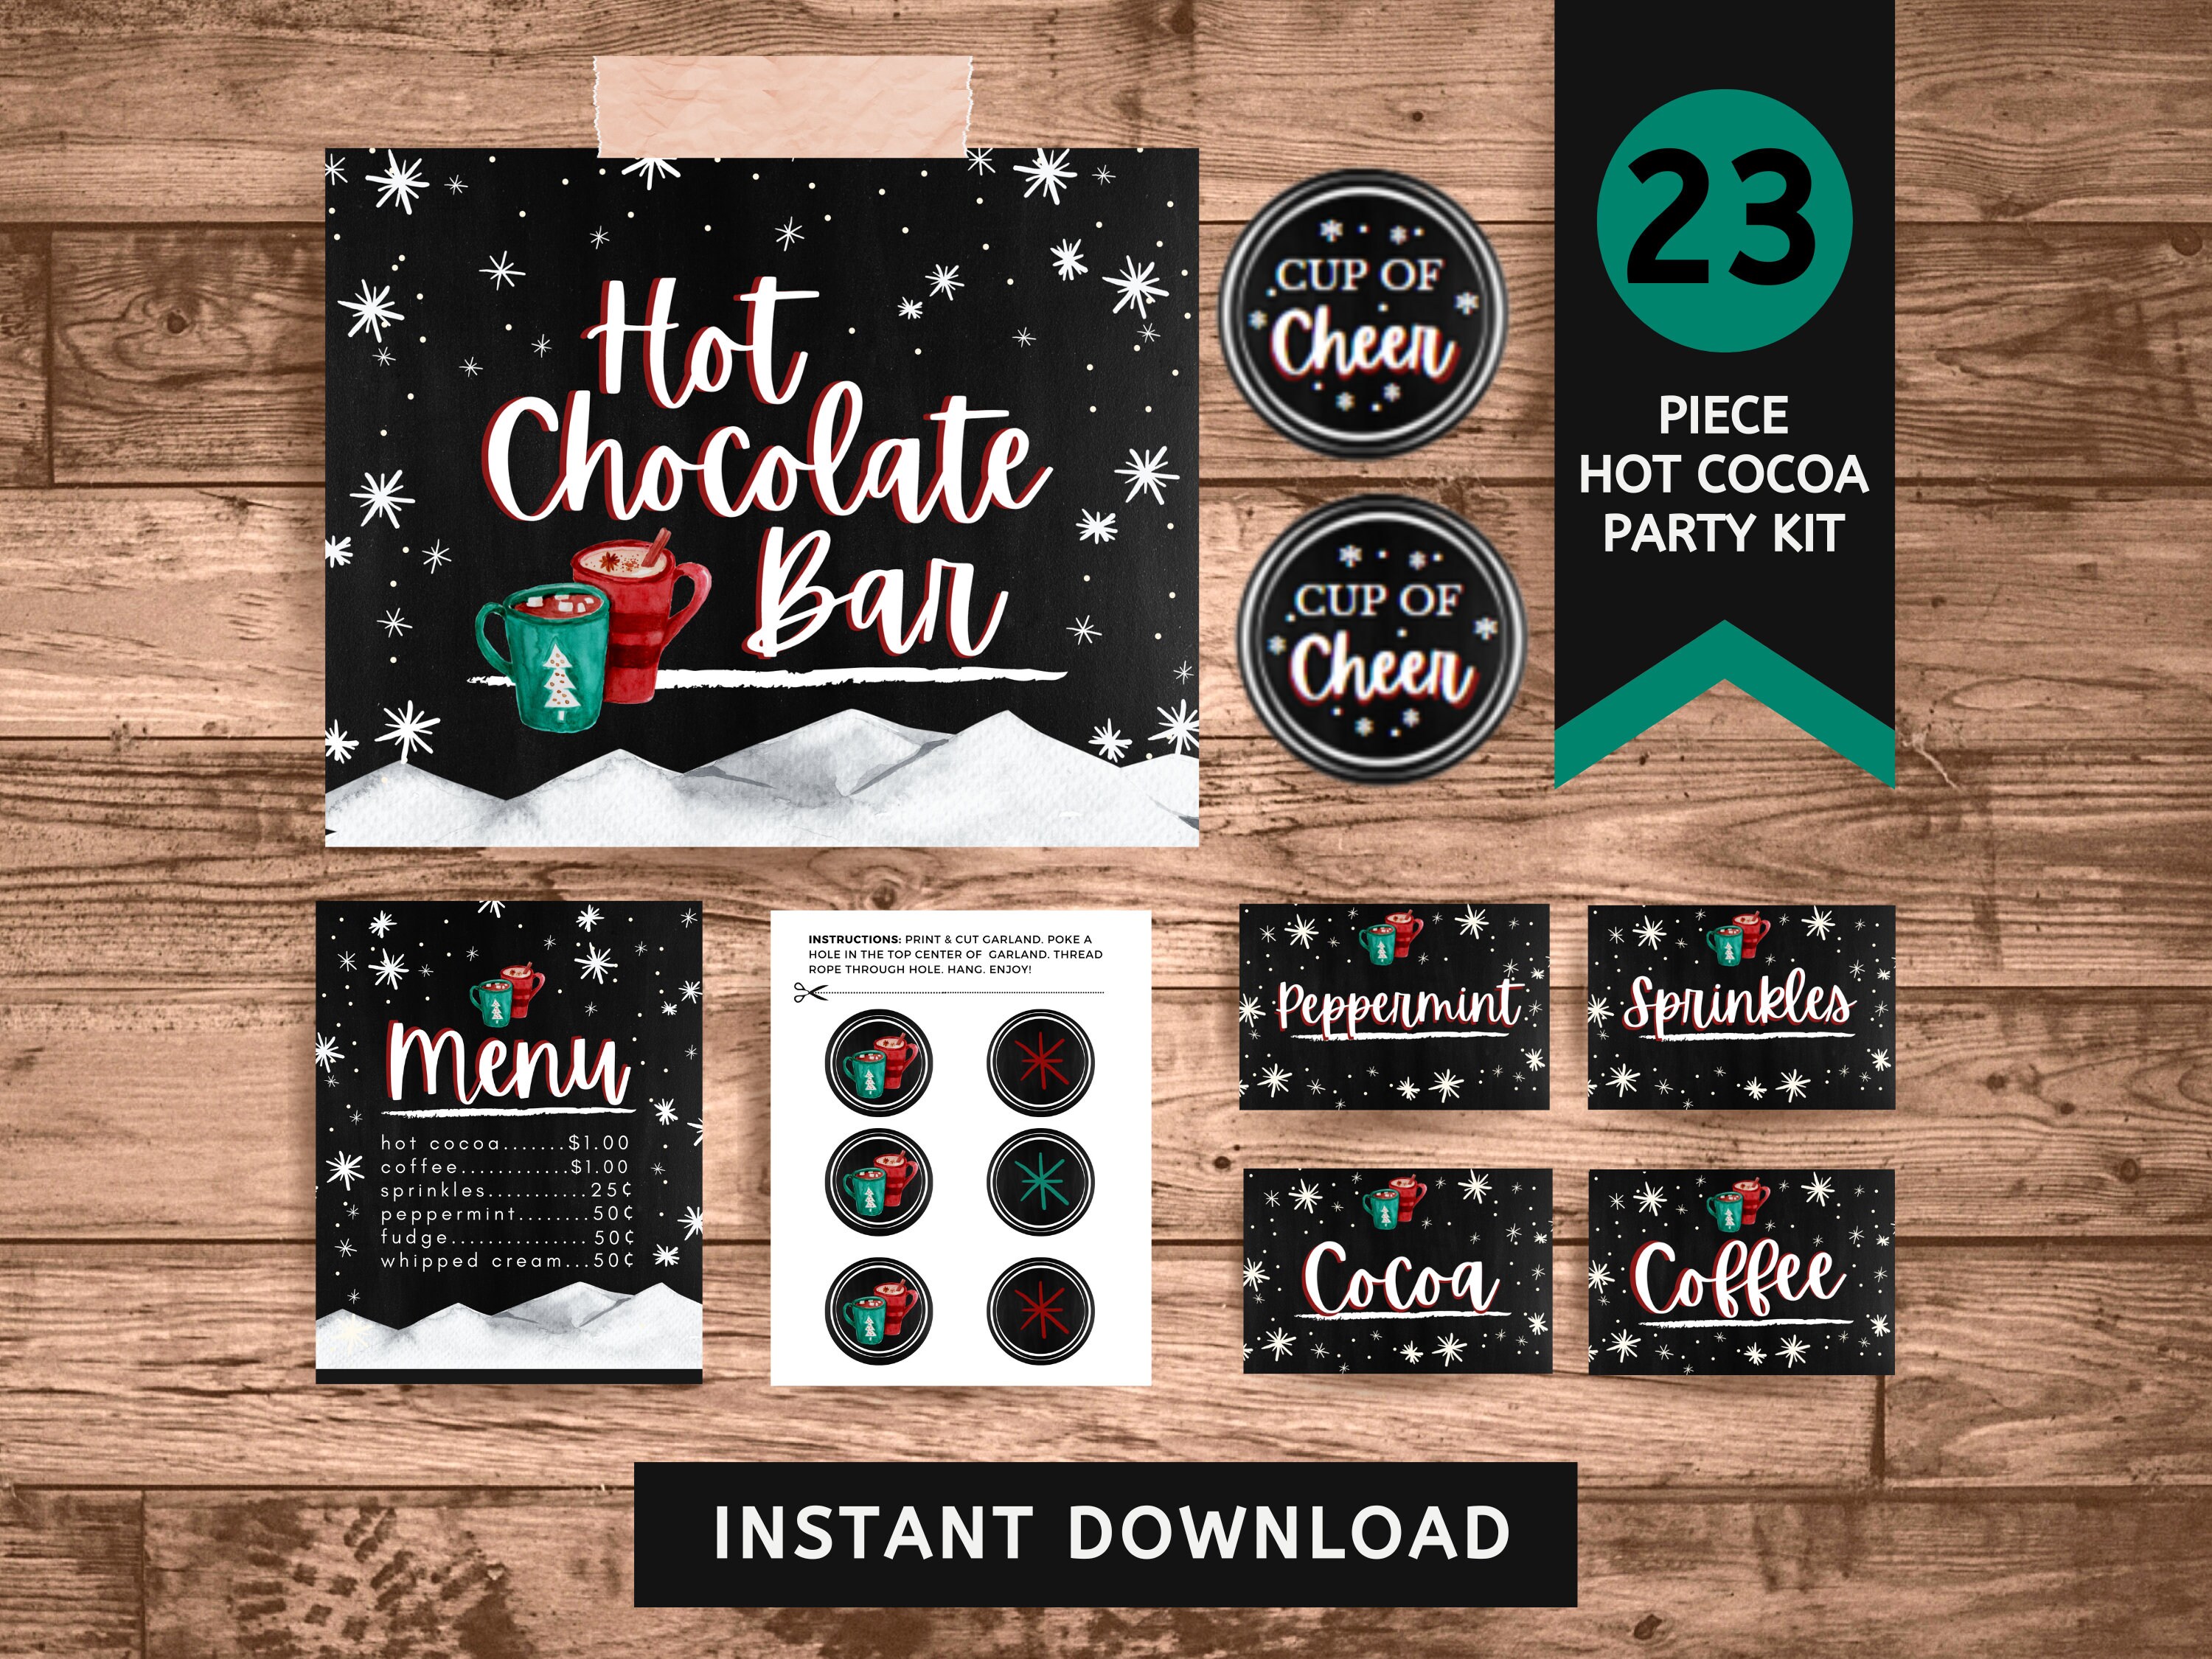 Hot Cocoa Bar Ideas (With Free Printables)